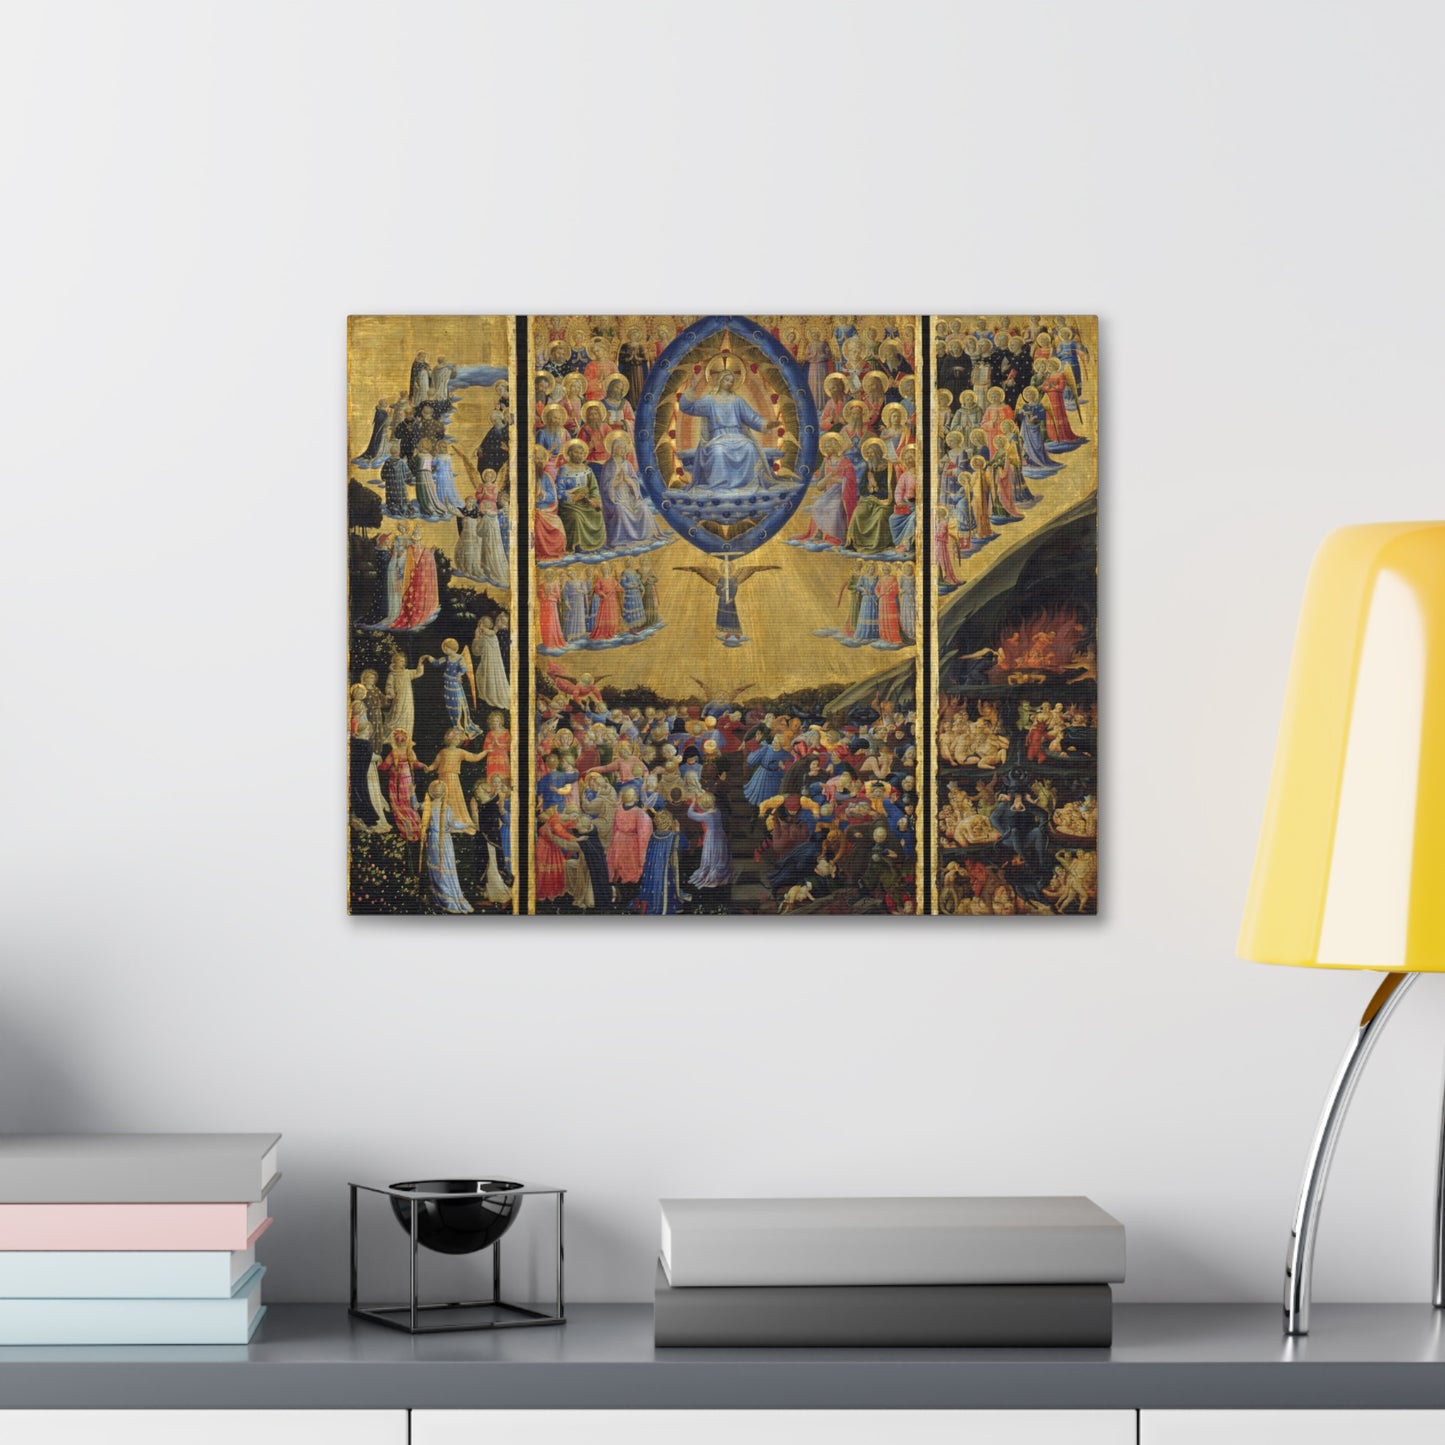 The Last Judgement by Fra Angelico Catholic Canvas Print, Traditional Catholic Religious Wall Art Home Decor